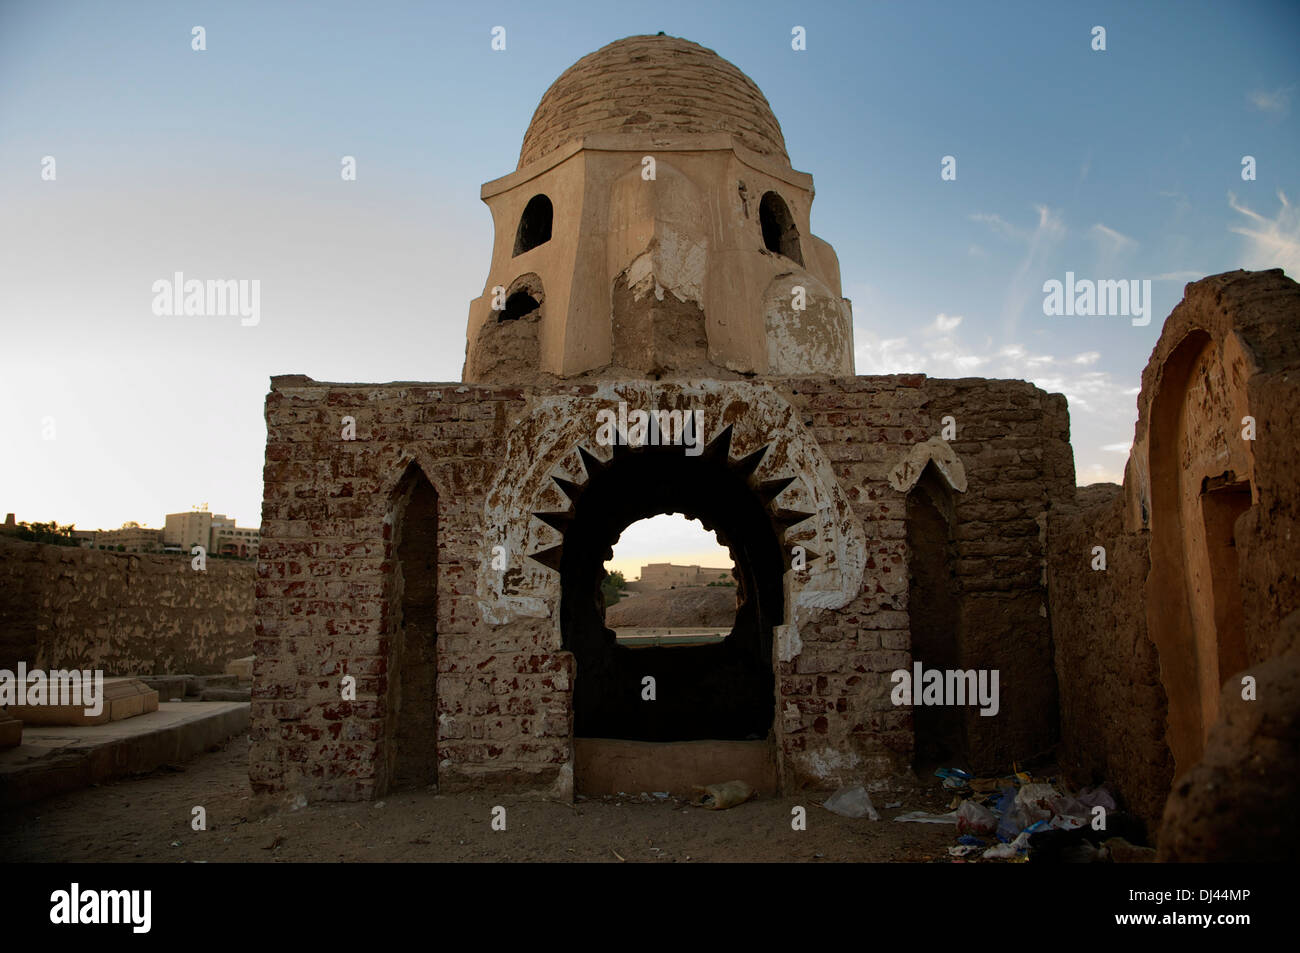 Tomb within the Fatamid cemetery complex at Aswan, Egypt. Stock Photo